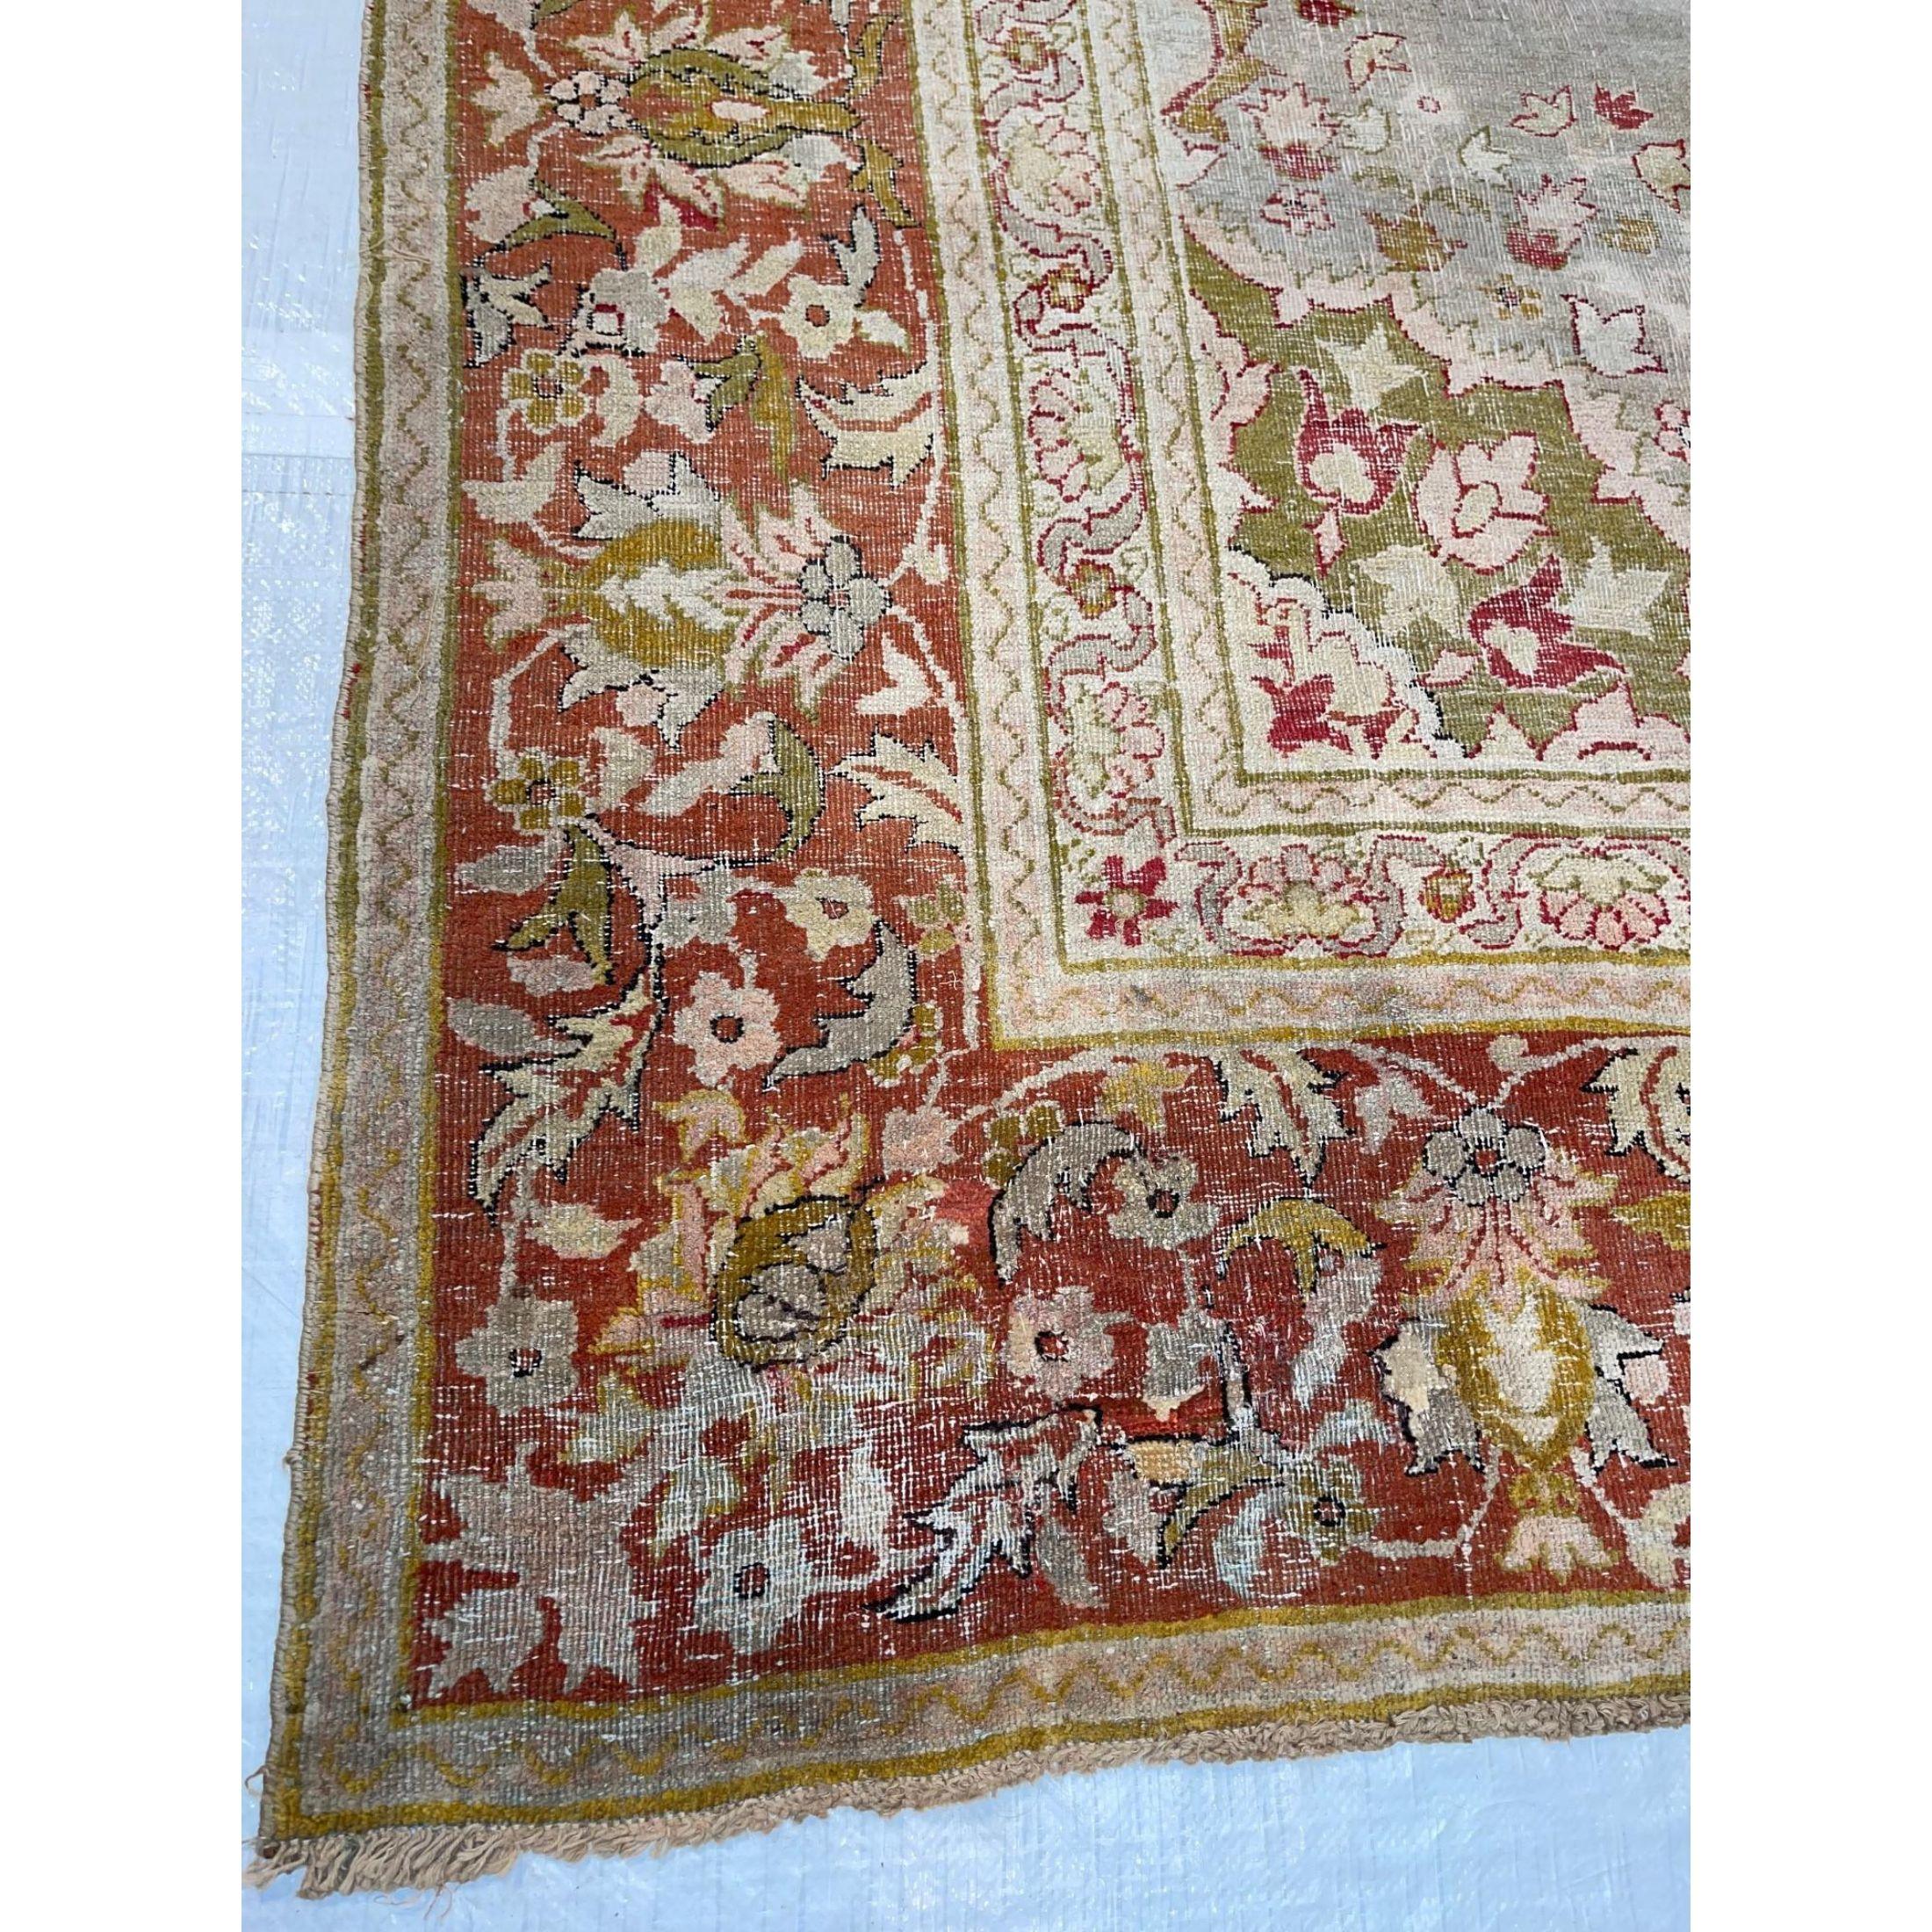 During the period of Colonial rule over India, Amritsar rugs began to reflect Western influences in their design. The craftspeople of Northern India took their chance to profit from the ever-increasing demand for exotic carpets by Queen Victoria. It